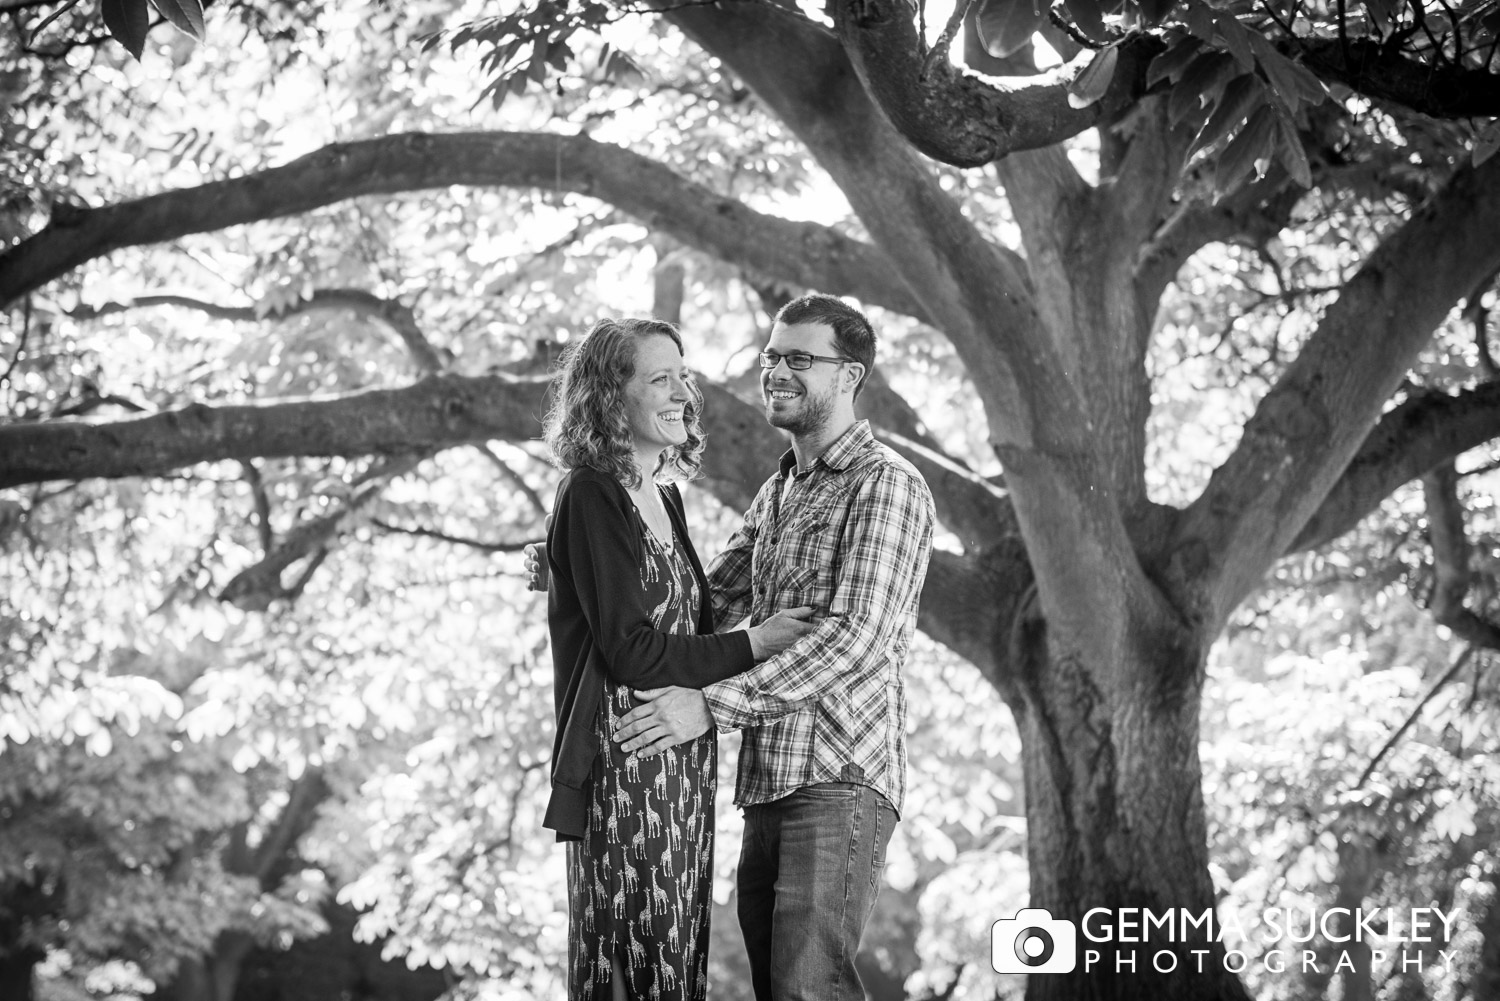 Photos of a coule during their engagement shoot in harrogate